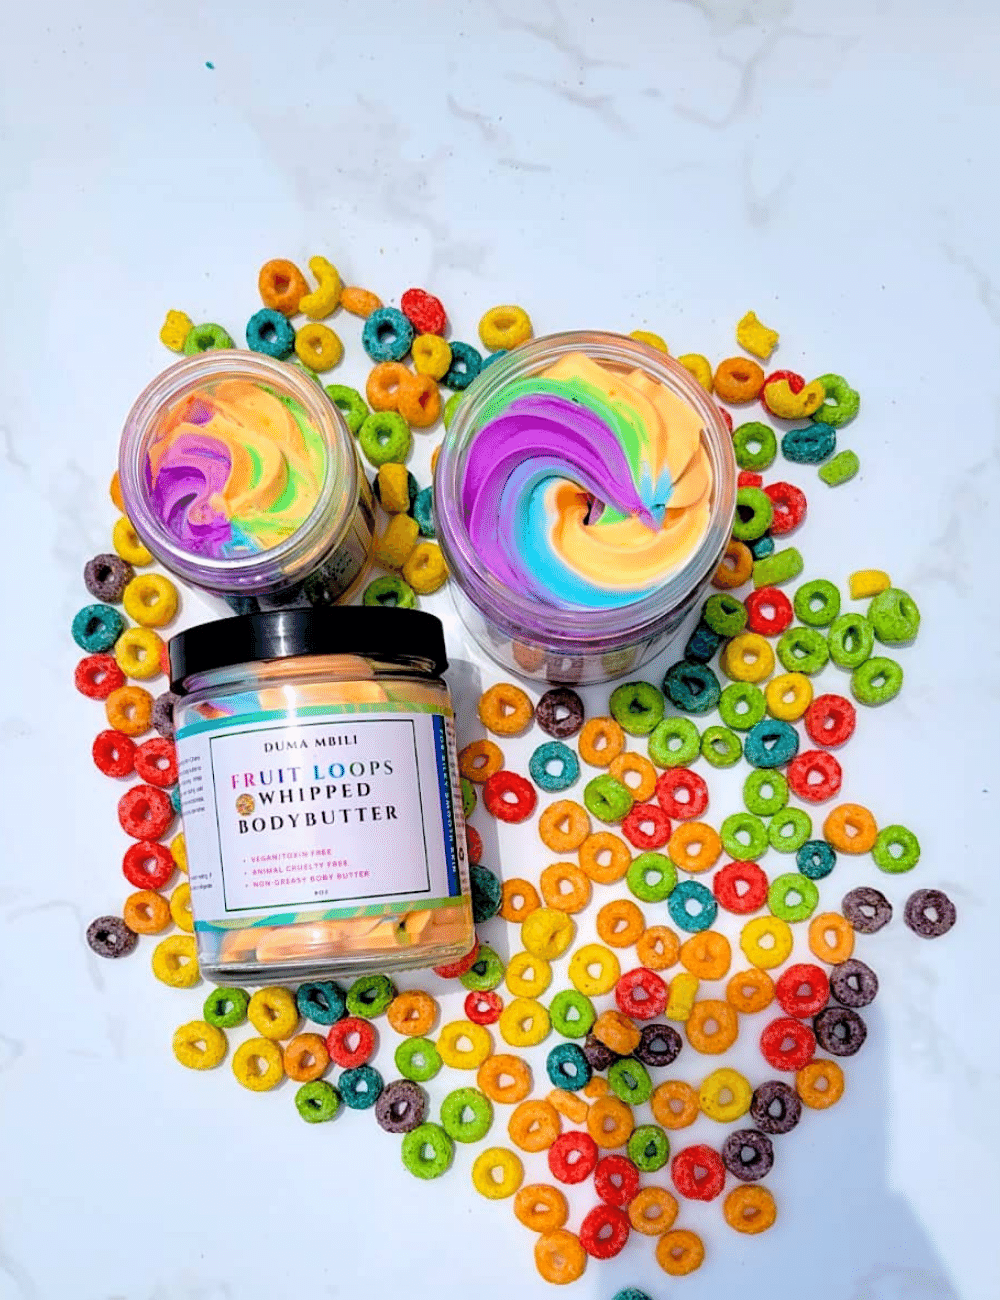 Fruit Loops Whipped Body Butter/dumambili bodybutters/PersonalCare